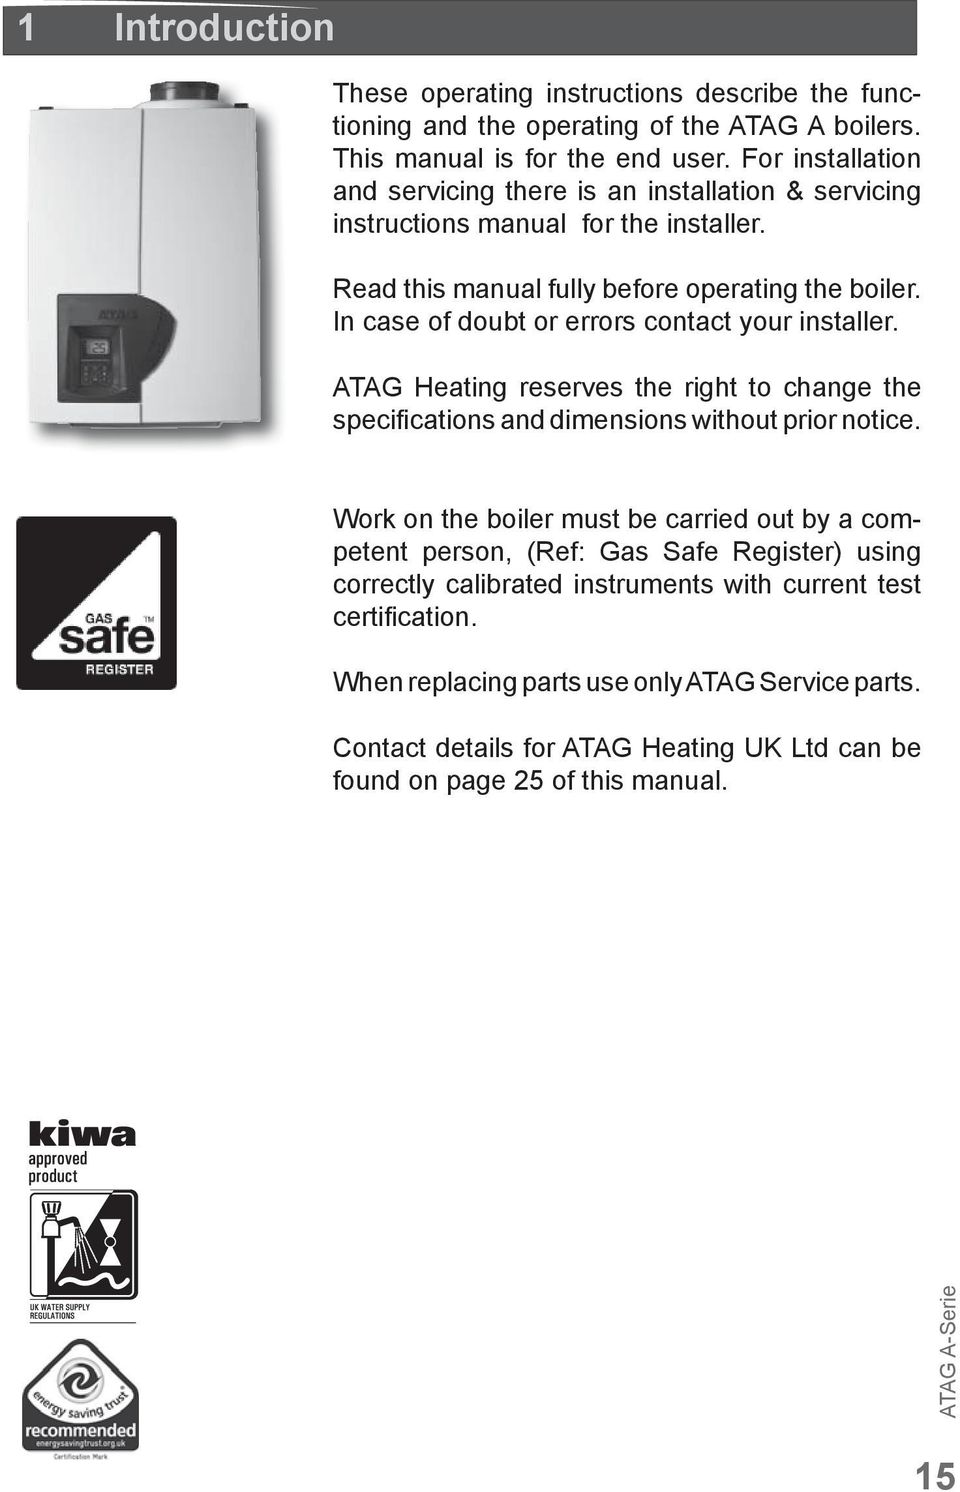 In case of doubt or errors contact your installer. ATAG Heating reserves the right to change the specifi cations and dimensions without prior notice.